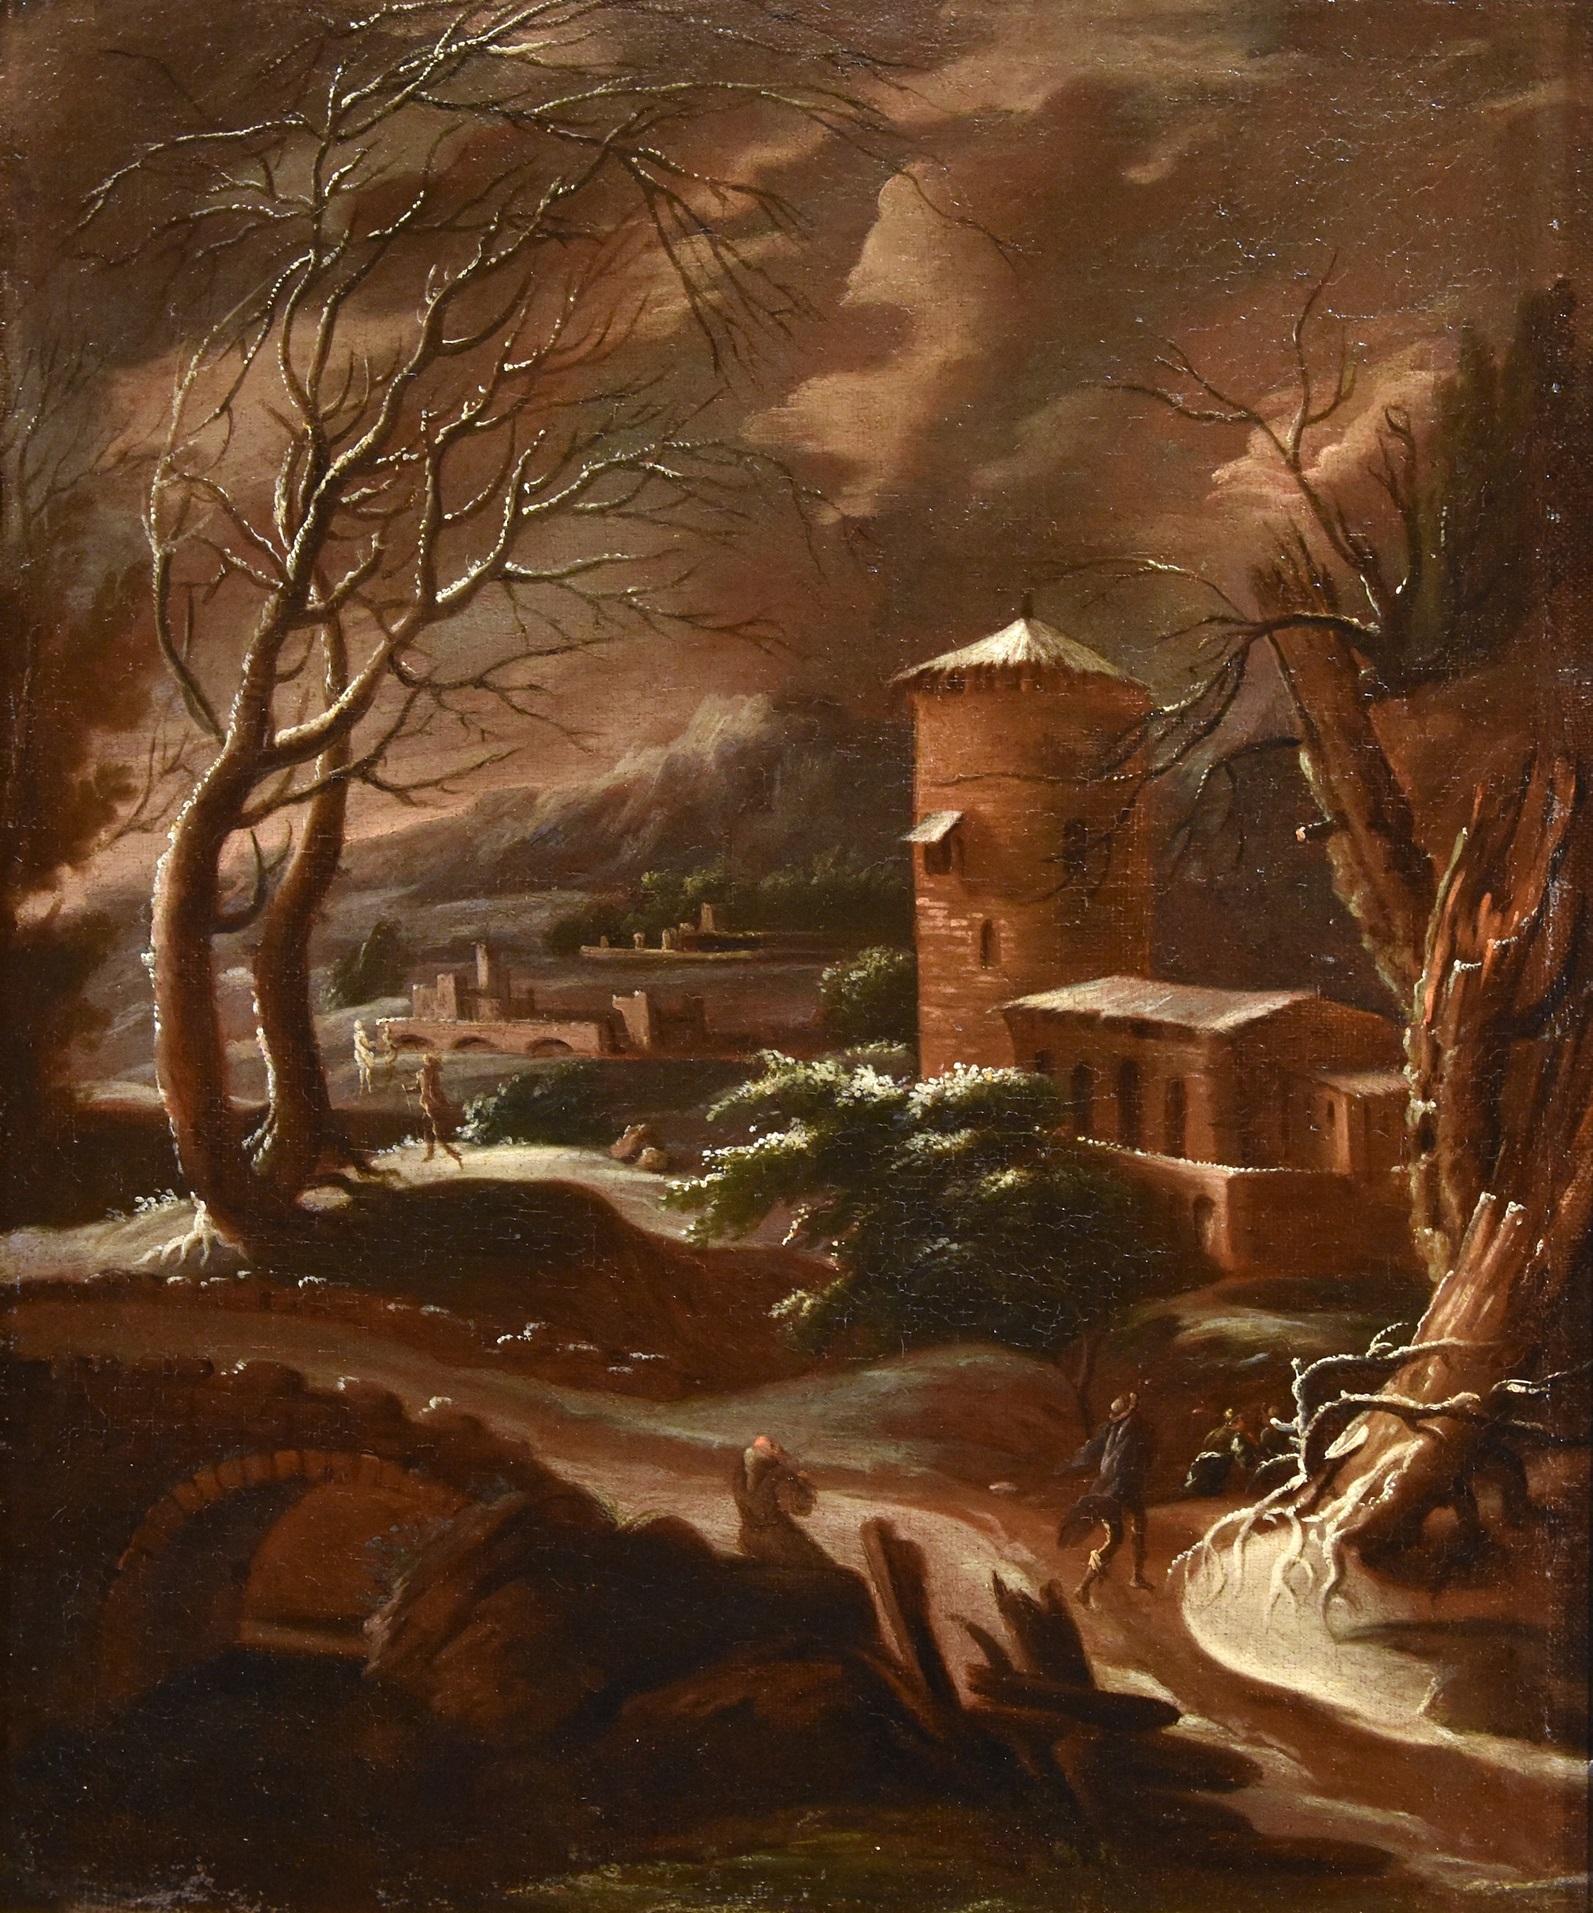 Winter Landscape Foschi Paint 18th CEntury Paint Oil on canvas Old master Italy - Painting by  Francesco Foschi (ancona, 1710 - Rome, 1780) 